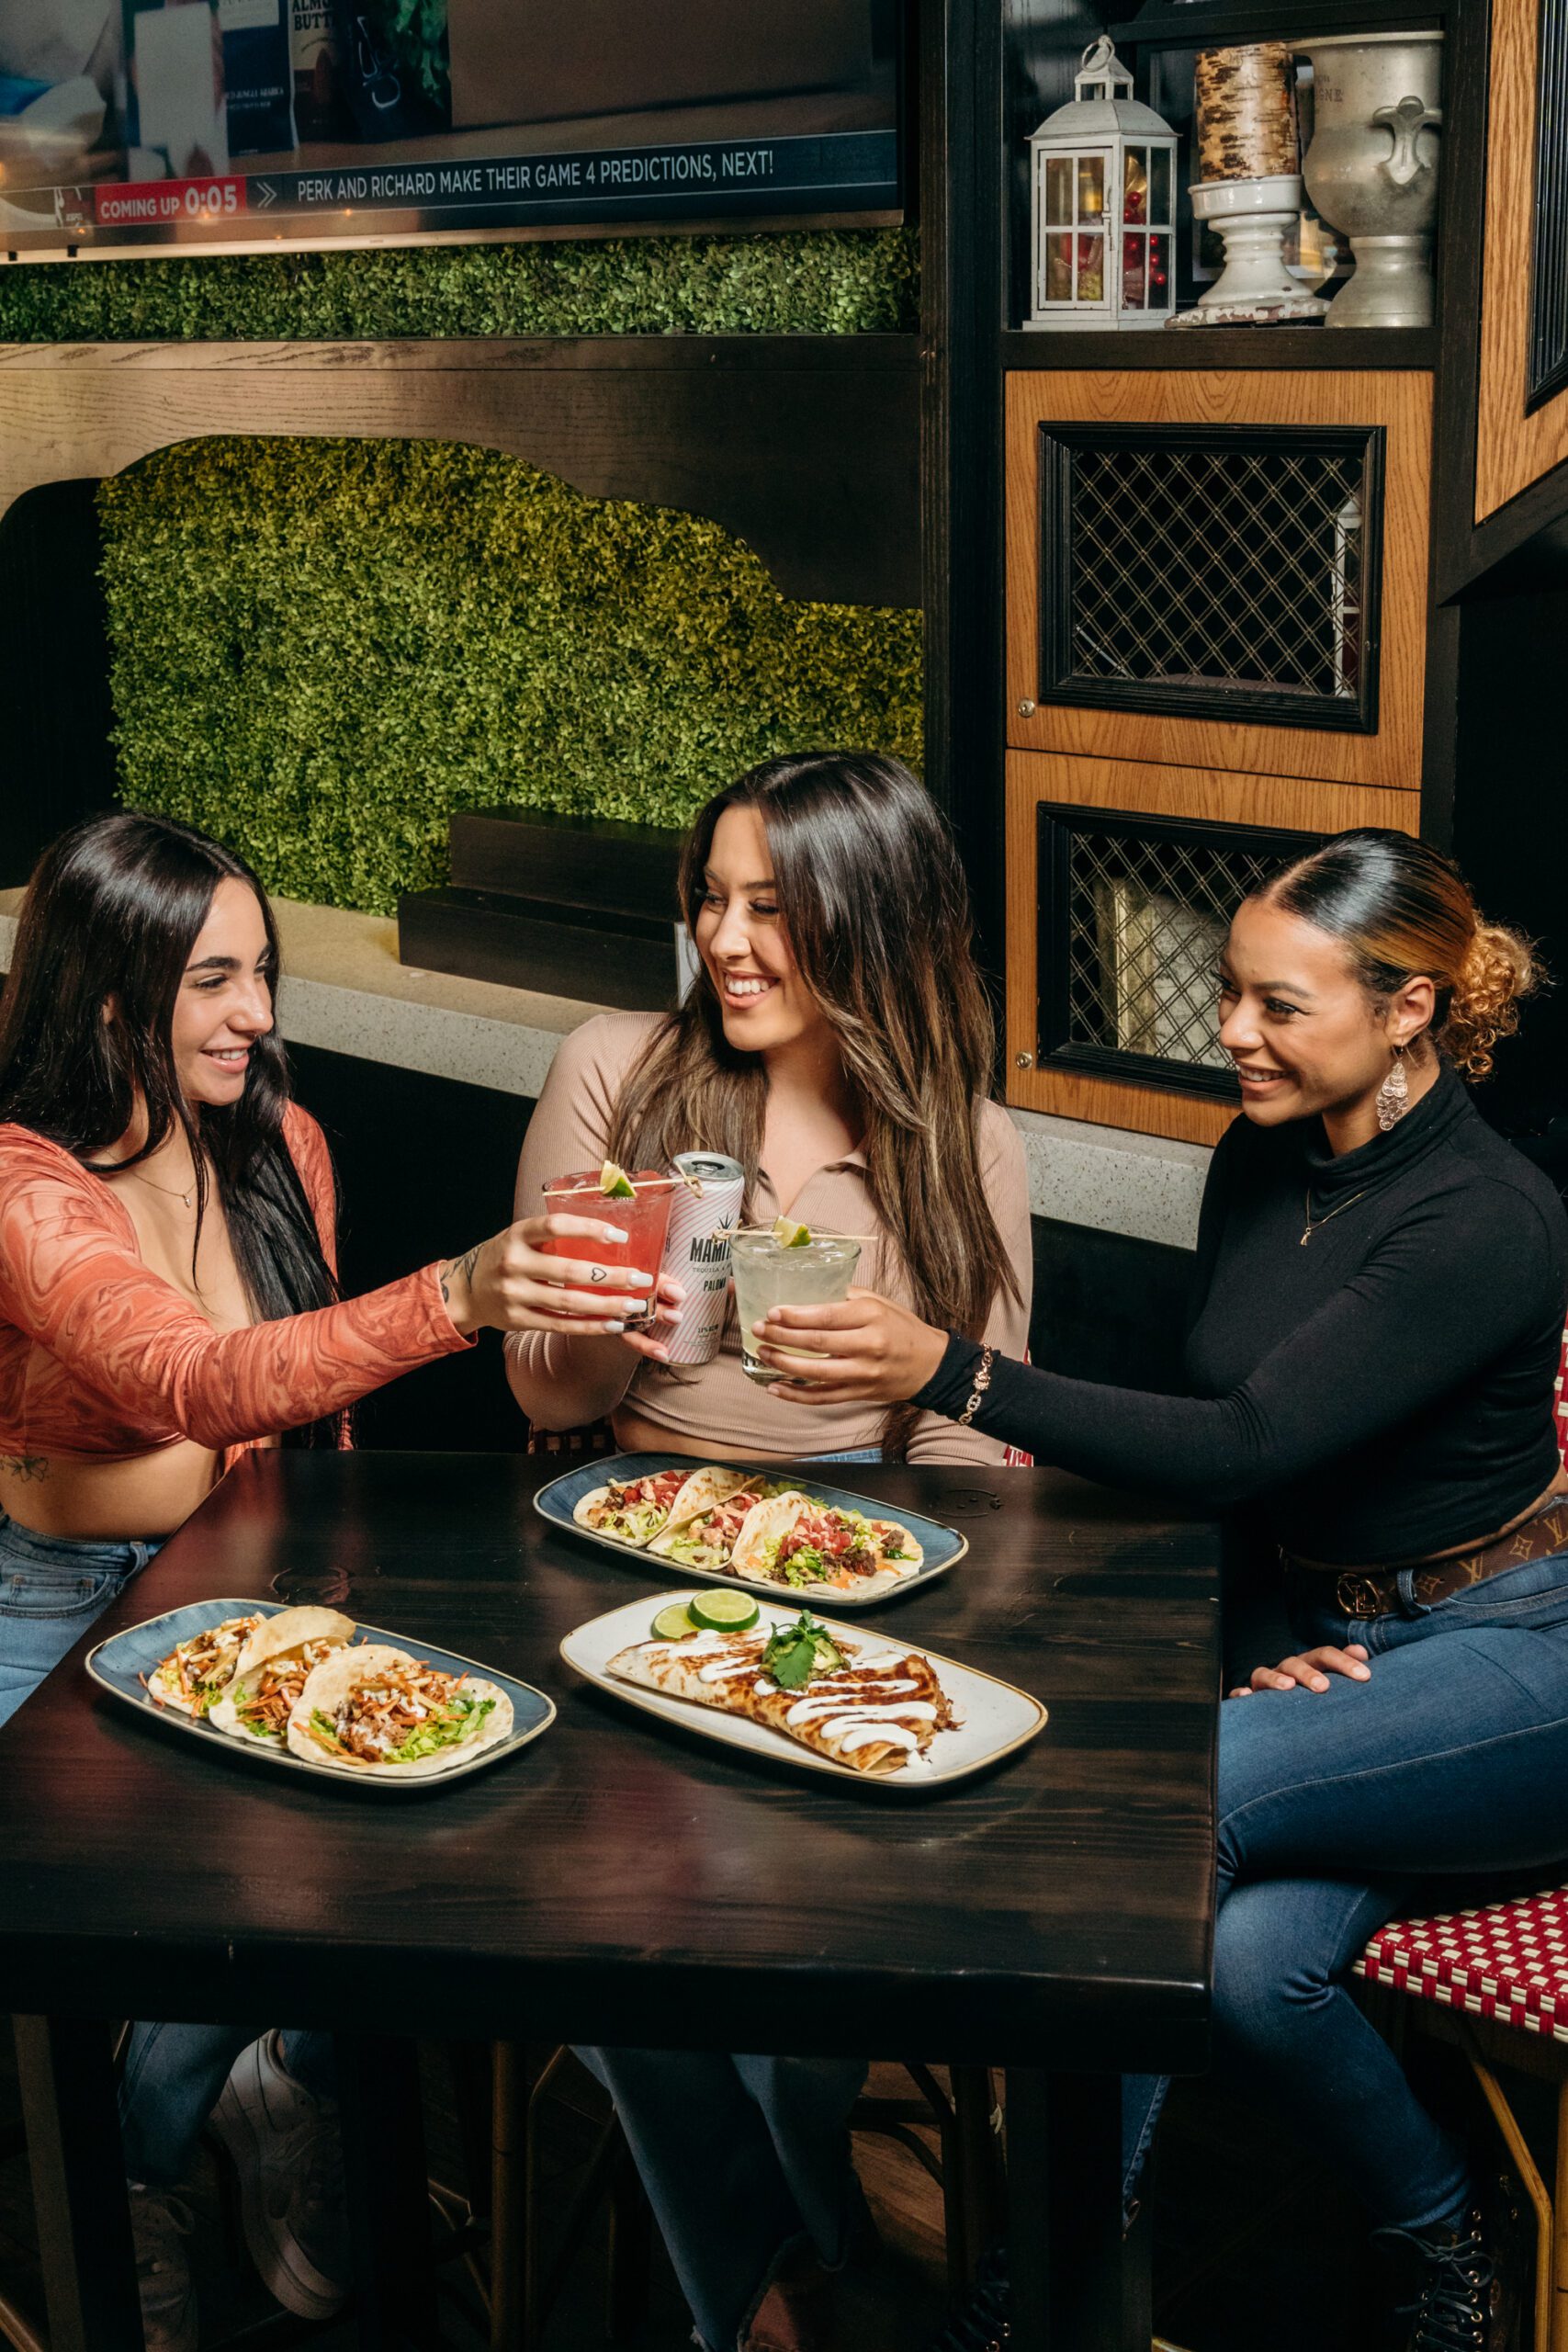 Three women are saying cheers with cocktails, sitting at a table with their dinner served.